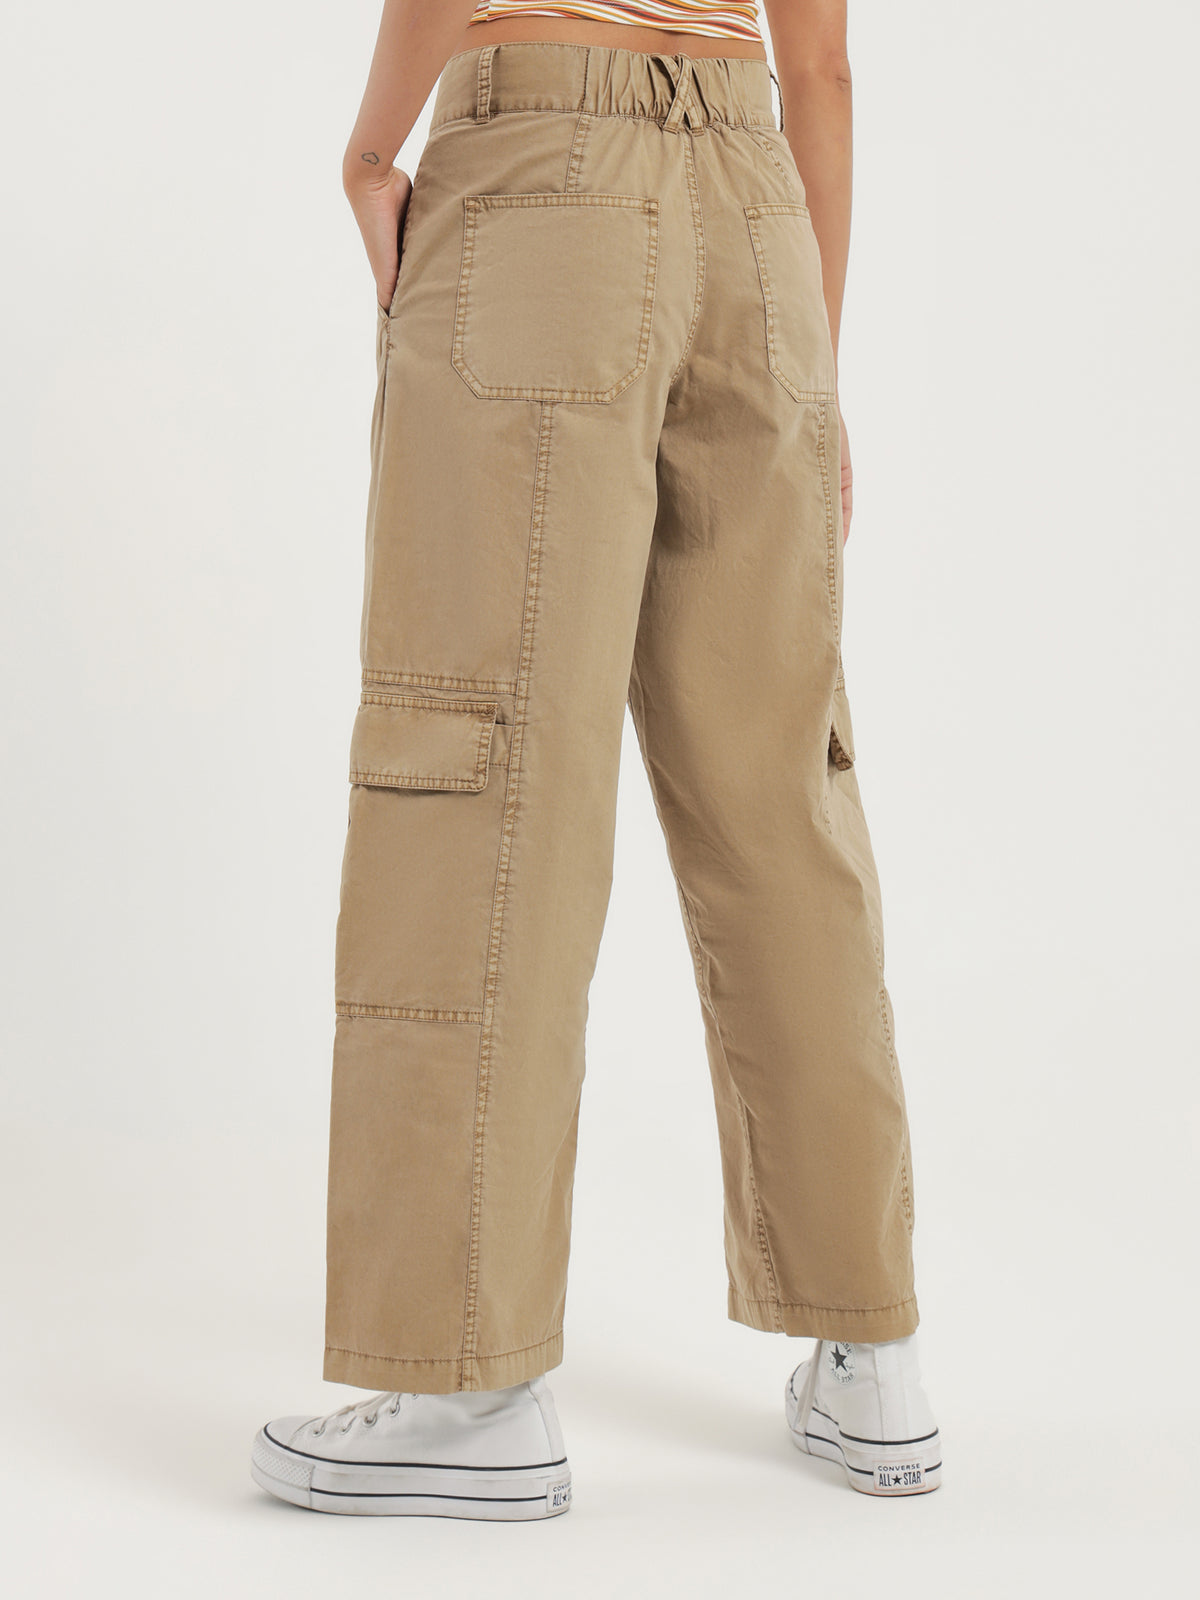 Made For Walking Cargo Pants in Sand